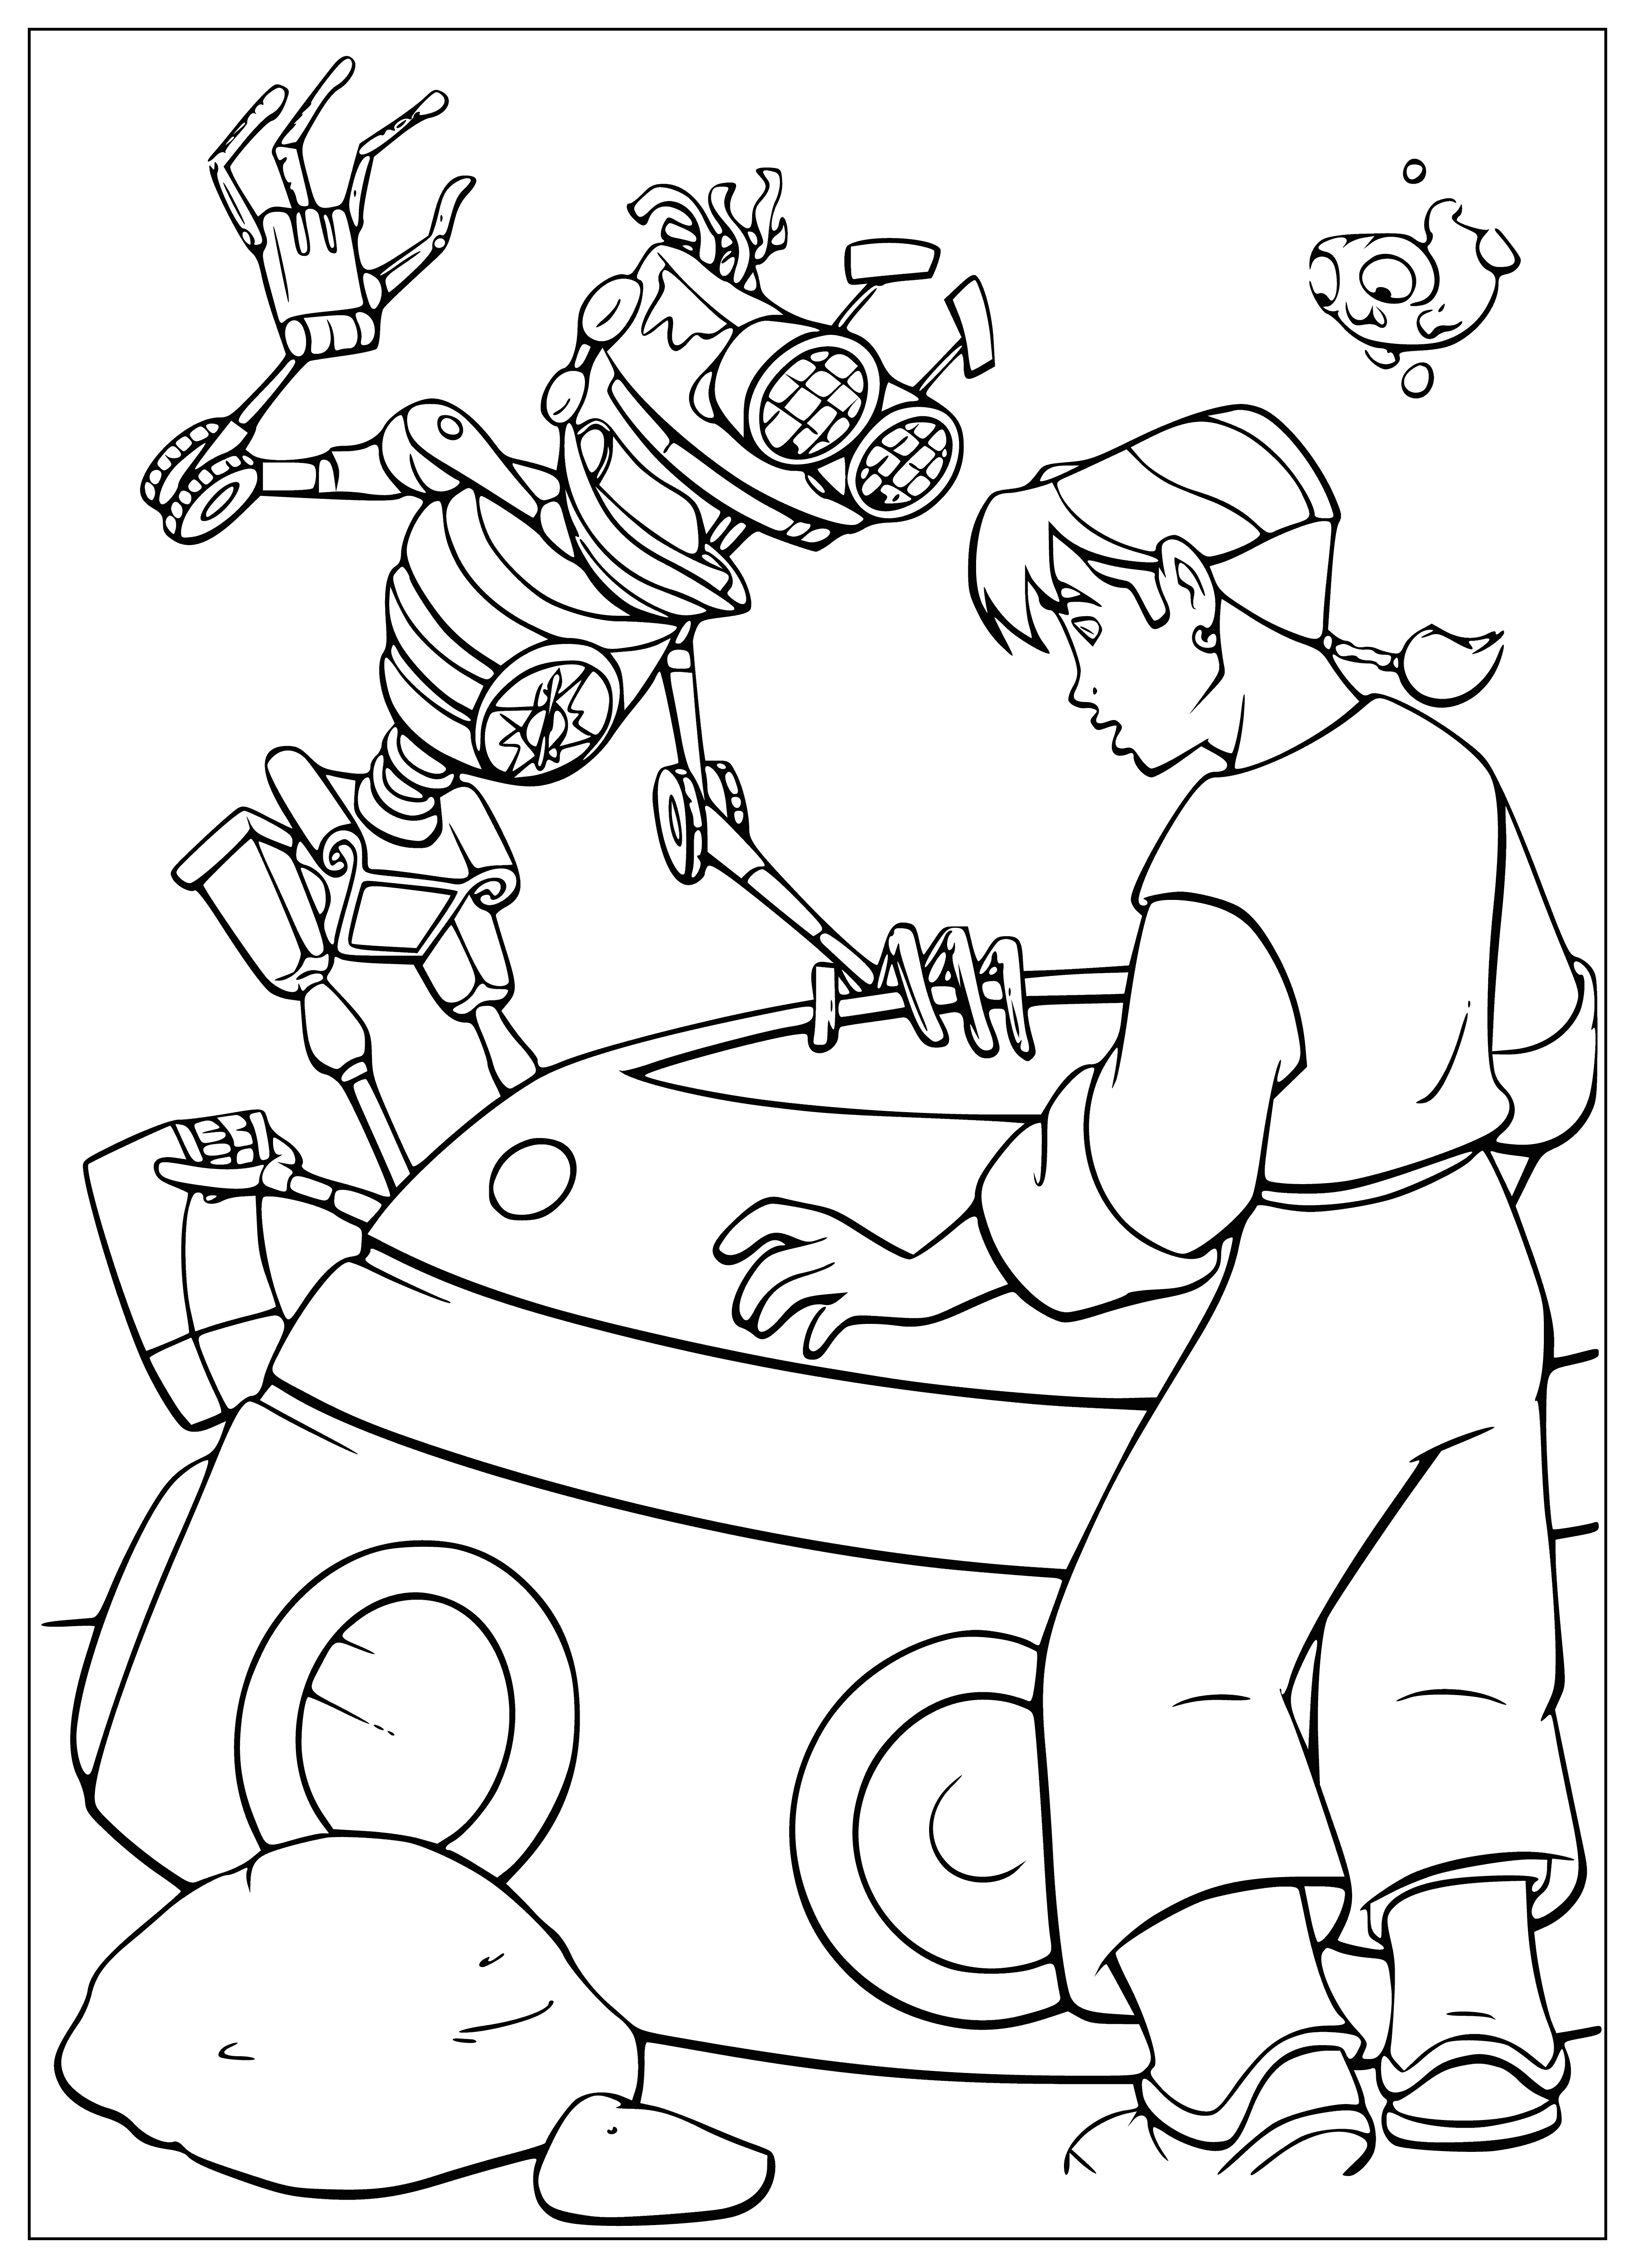 Emergency exit coloring page